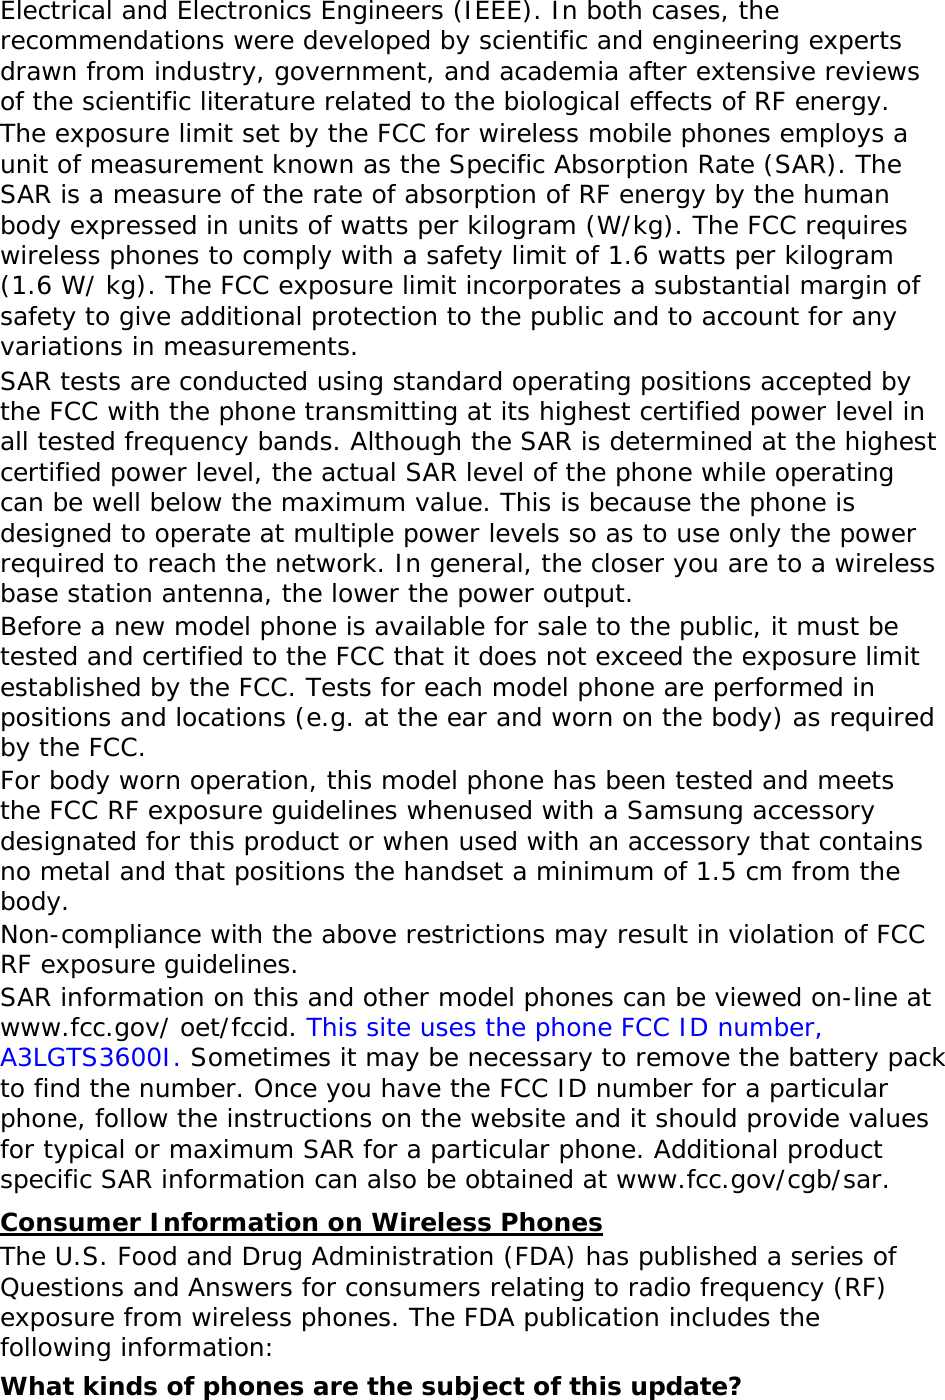 Electrical and Electronics Engineers (IEEE). In both cases, the recommendations were developed by scientific and engineering experts drawn from industry, government, and academia after extensive reviews of the scientific literature related to the biological effects of RF energy. The exposure limit set by the FCC for wireless mobile phones employs a unit of measurement known as the Specific Absorption Rate (SAR). The SAR is a measure of the rate of absorption of RF energy by the human body expressed in units of watts per kilogram (W/kg). The FCC requires wireless phones to comply with a safety limit of 1.6 watts per kilogram (1.6 W/ kg). The FCC exposure limit incorporates a substantial margin of safety to give additional protection to the public and to account for any variations in measurements. SAR tests are conducted using standard operating positions accepted by the FCC with the phone transmitting at its highest certified power level in all tested frequency bands. Although the SAR is determined at the highest certified power level, the actual SAR level of the phone while operating can be well below the maximum value. This is because the phone is designed to operate at multiple power levels so as to use only the power required to reach the network. In general, the closer you are to a wireless base station antenna, the lower the power output. Before a new model phone is available for sale to the public, it must be tested and certified to the FCC that it does not exceed the exposure limit established by the FCC. Tests for each model phone are performed in positions and locations (e.g. at the ear and worn on the body) as required by the FCC.   For body worn operation, this model phone has been tested and meets the FCC RF exposure guidelines whenused with a Samsung accessory designated for this product or when used with an accessory that contains no metal and that positions the handset a minimum of 1.5 cm from the body.  Non-compliance with the above restrictions may result in violation of FCC RF exposure guidelines. SAR information on this and other model phones can be viewed on-line at www.fcc.gov/ oet/fccid. This site uses the phone FCC ID number, A3LGTS3600I. Sometimes it may be necessary to remove the battery pack to find the number. Once you have the FCC ID number for a particular phone, follow the instructions on the website and it should provide values for typical or maximum SAR for a particular phone. Additional product specific SAR information can also be obtained at www.fcc.gov/cgb/sar. Consumer Information on Wireless Phones The U.S. Food and Drug Administration (FDA) has published a series of Questions and Answers for consumers relating to radio frequency (RF) exposure from wireless phones. The FDA publication includes the following information: What kinds of phones are the subject of this update? 